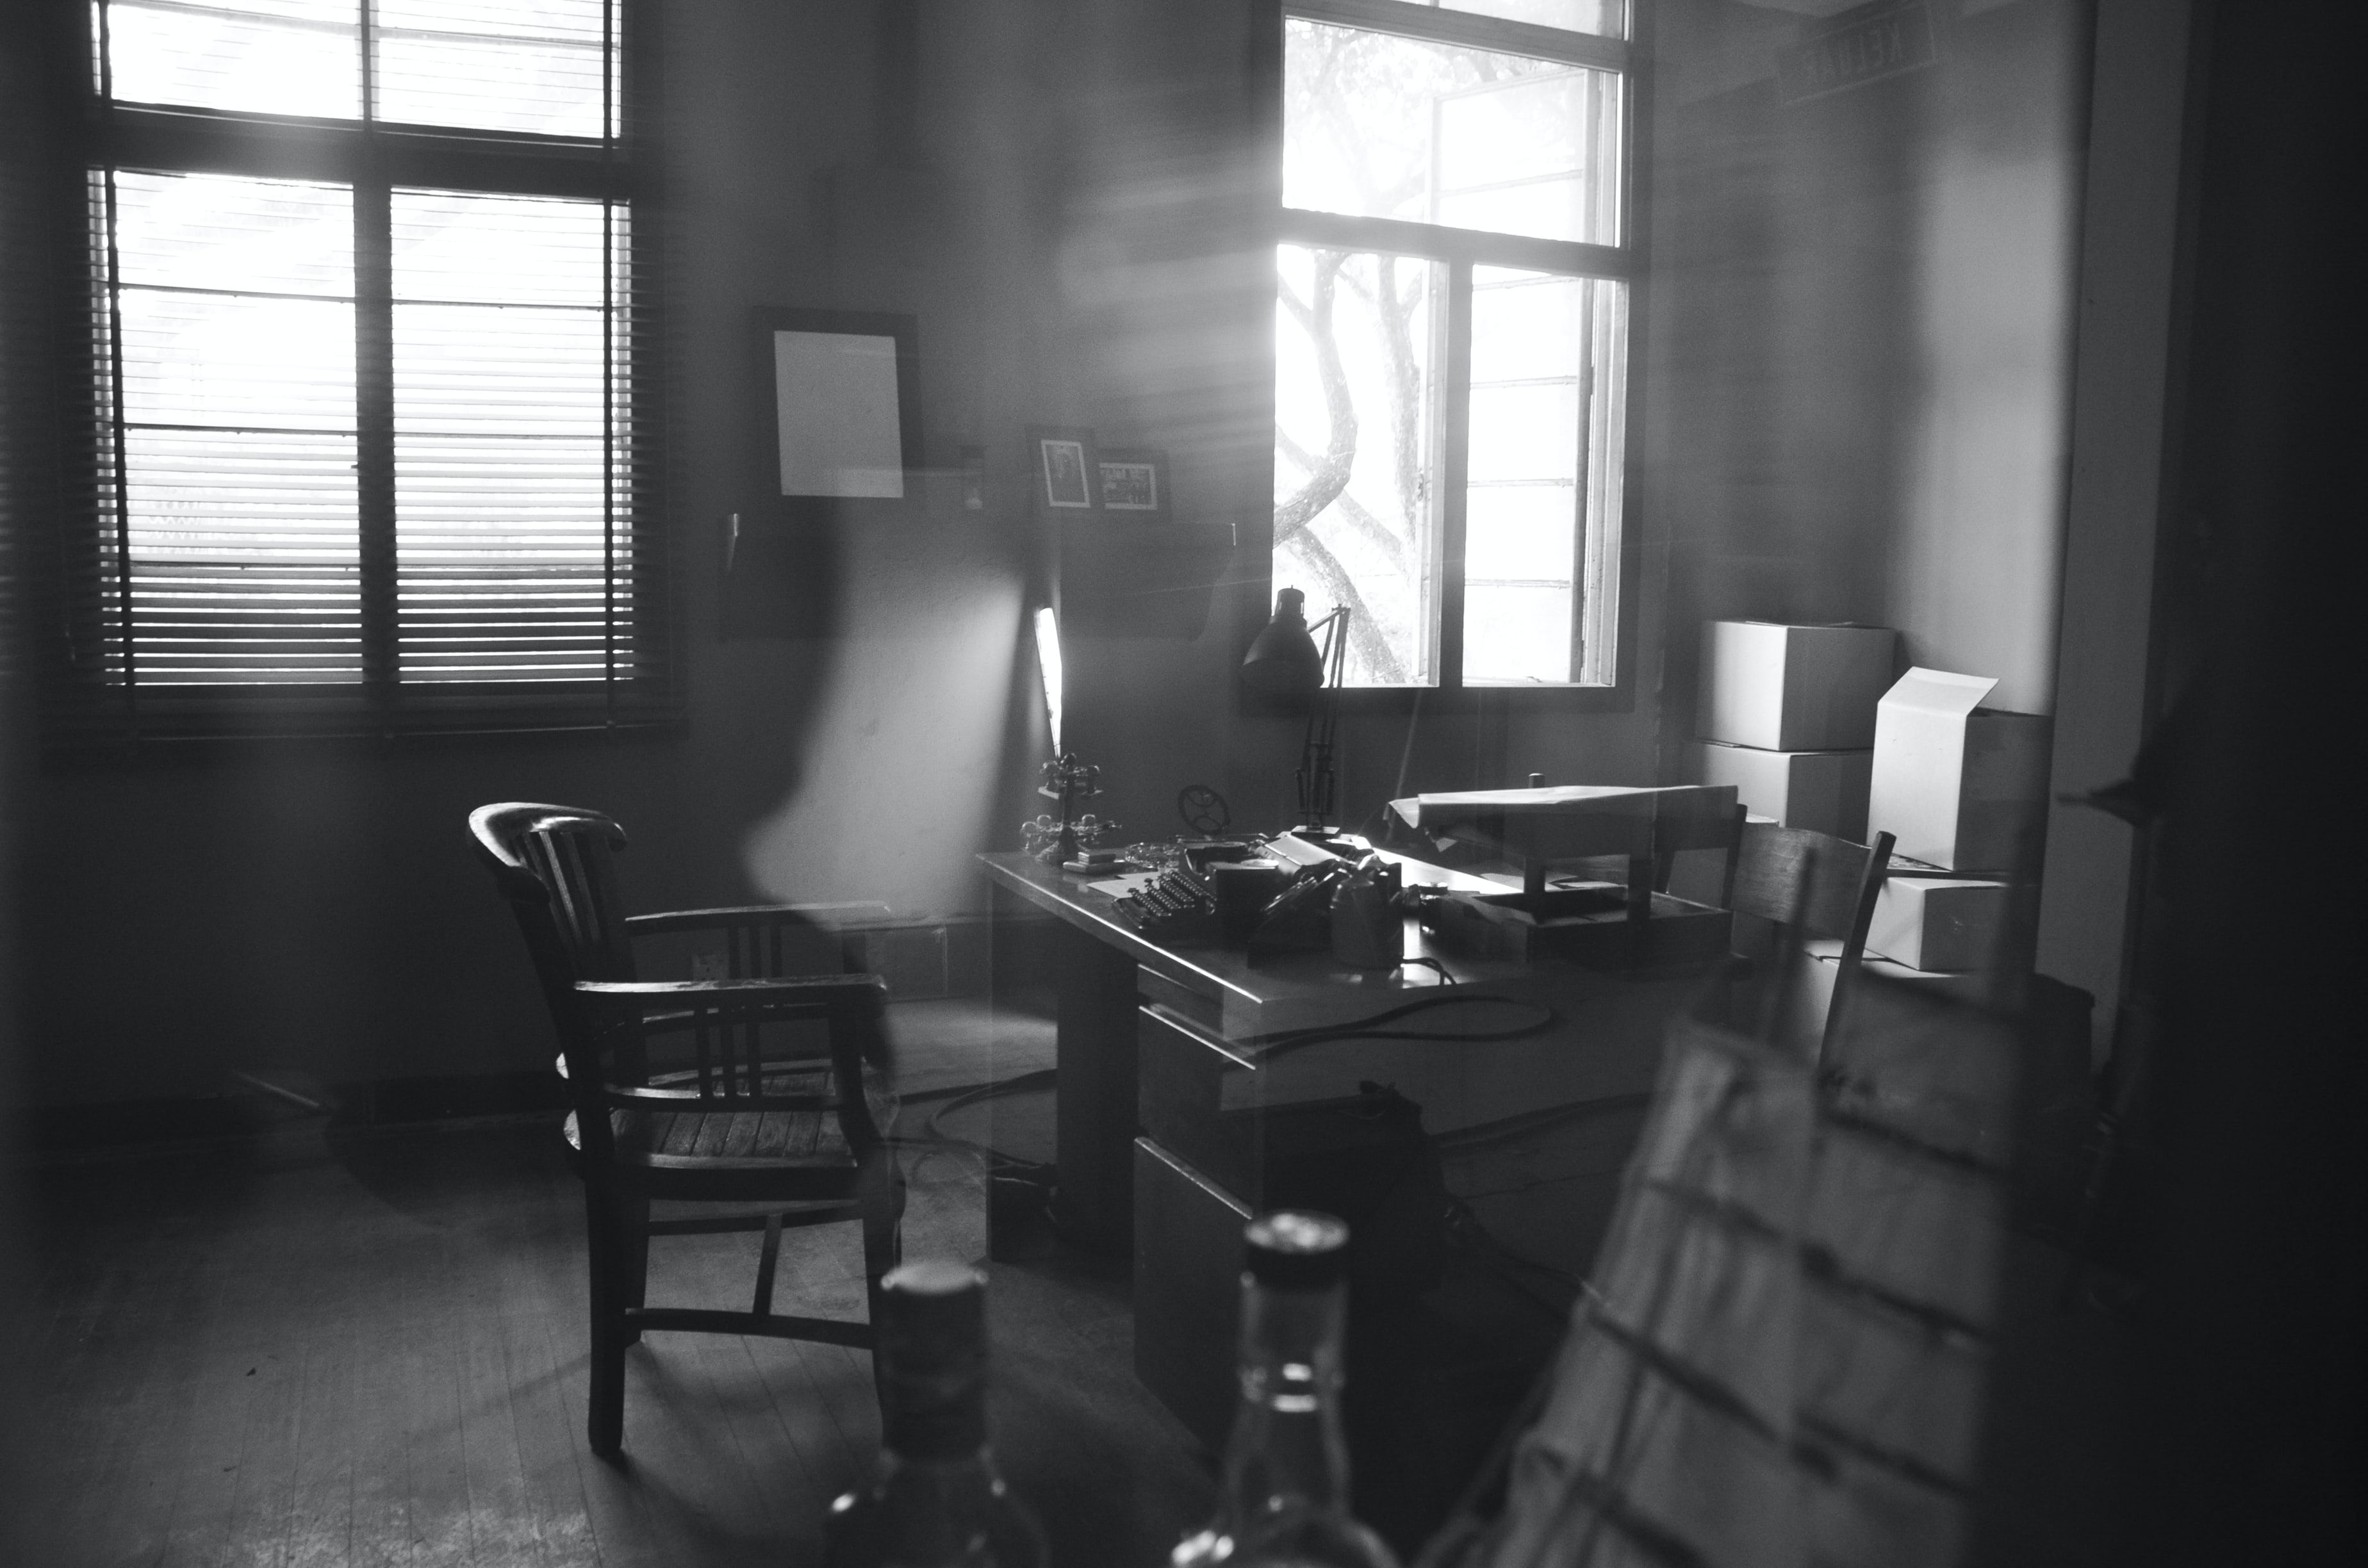 Black and white shot of investigator's office; image by Michelle Ding, via Unsplash.com.